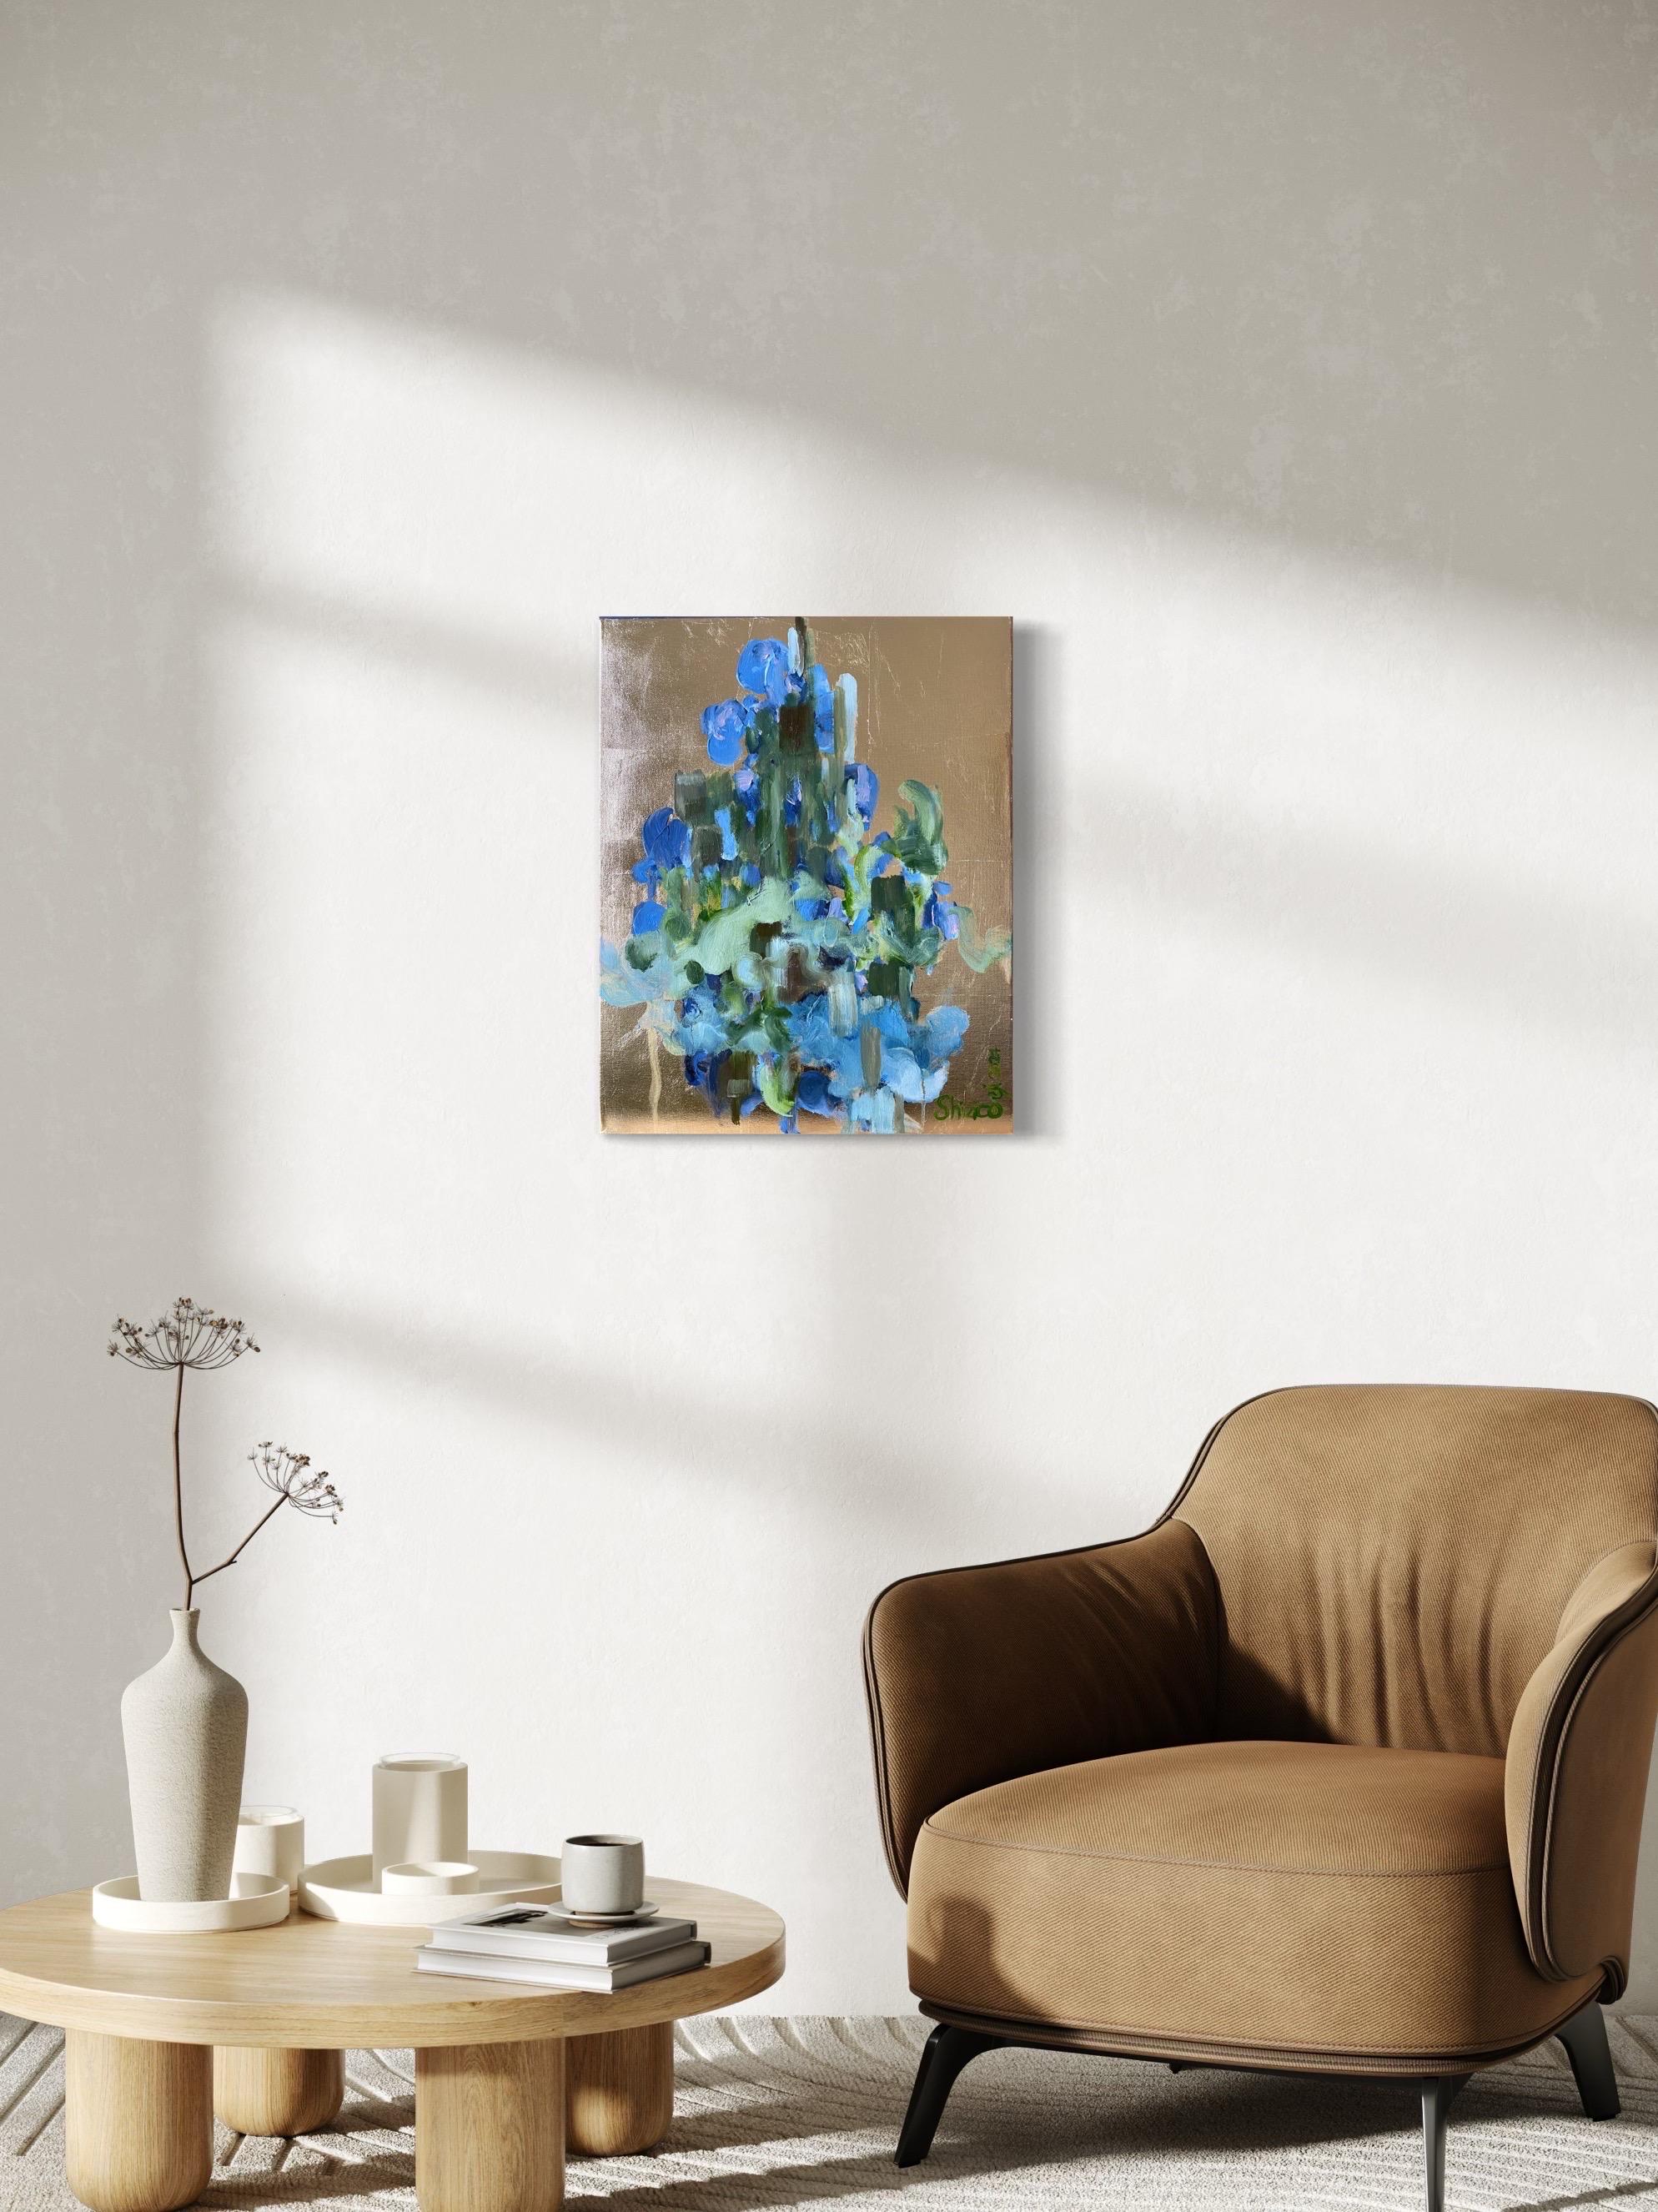 Originals Oil-Magic Bell in Golden Sunlit-UK Awarded Artist-Botanical Abstract  - Painting by Shizico Yi